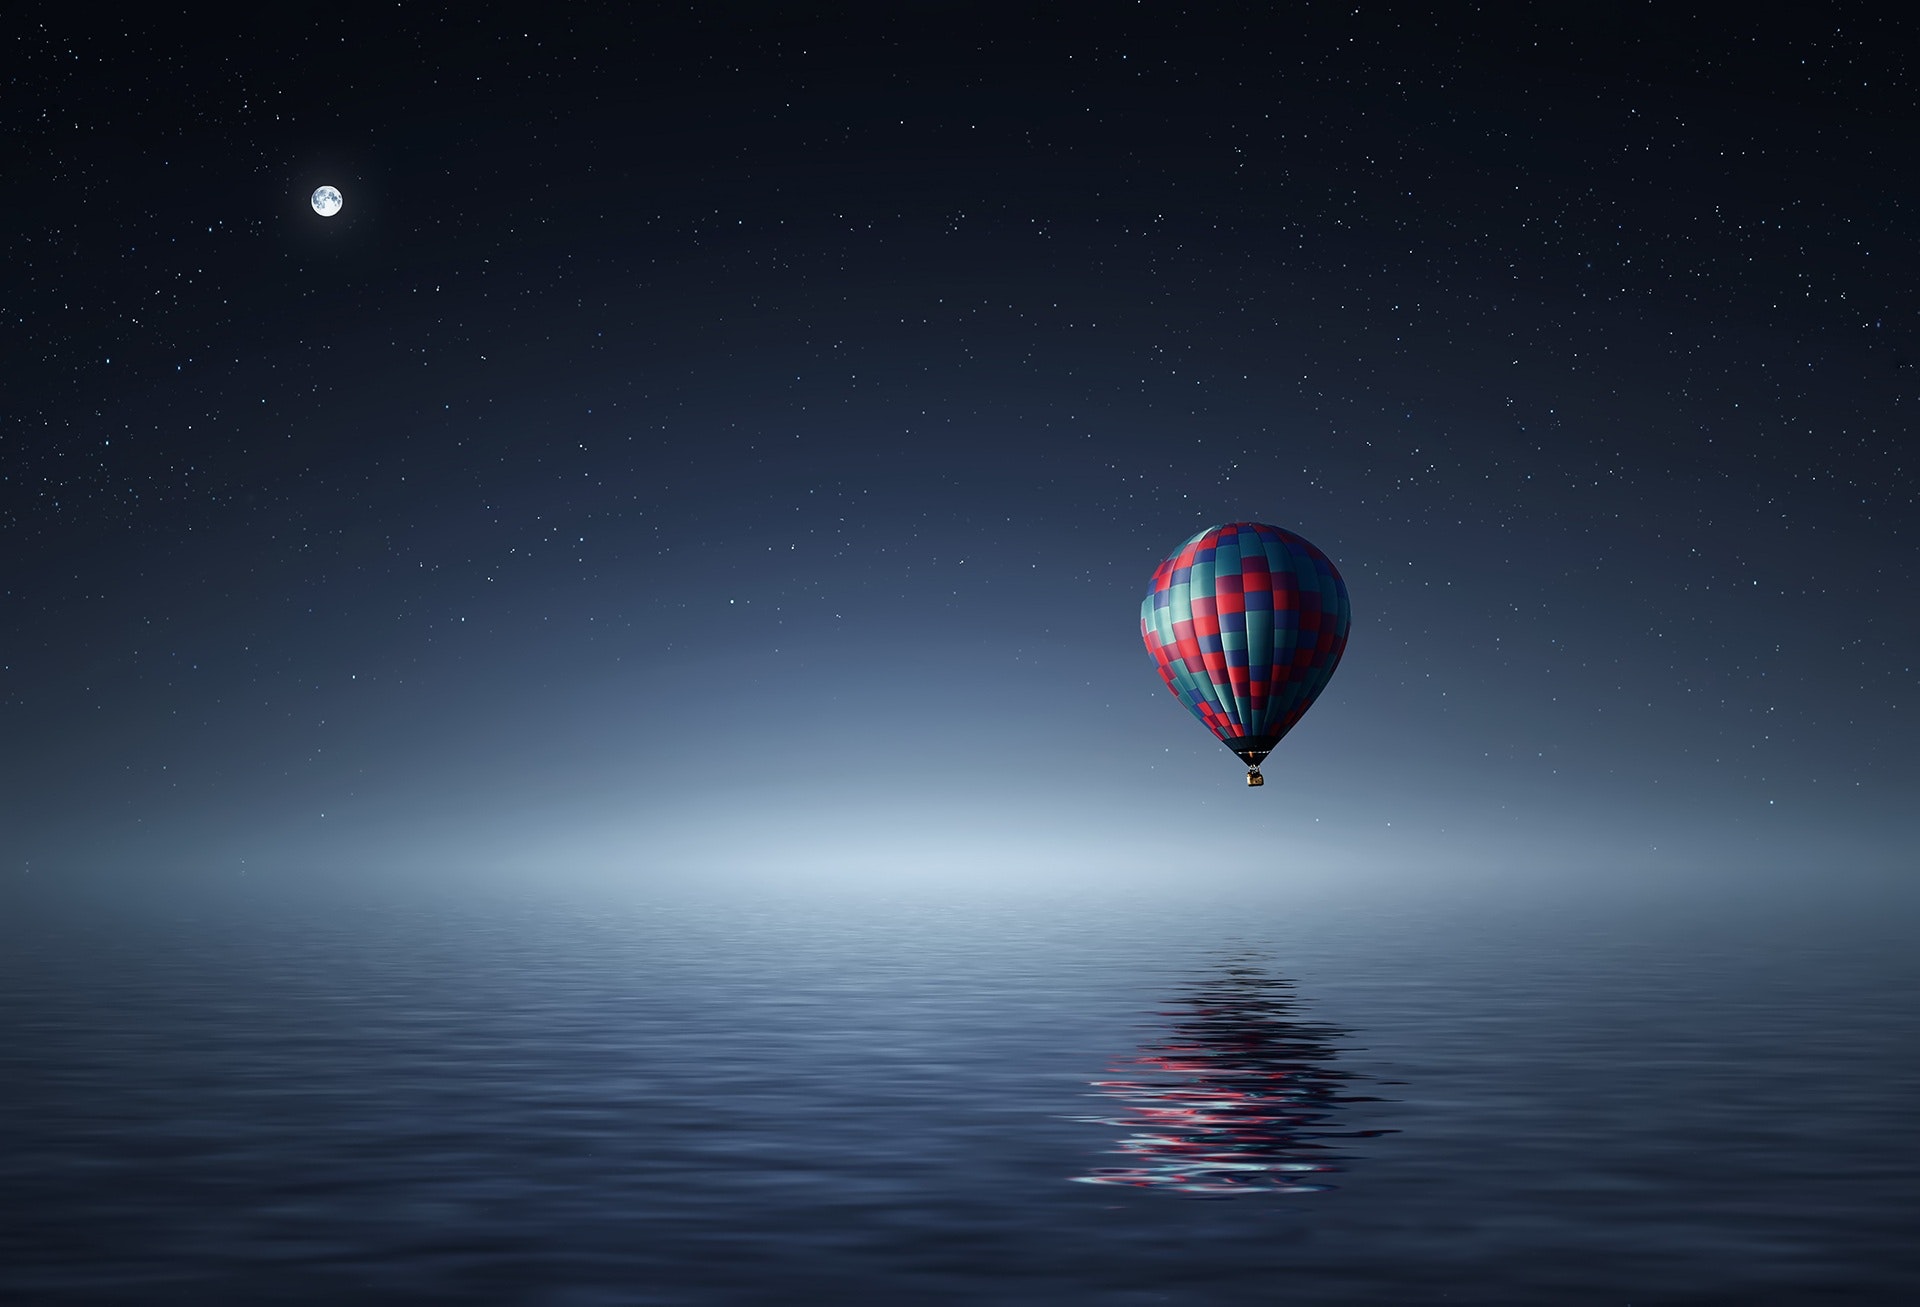 Red and blue hot air balloon floating on air on body of water during night time photo